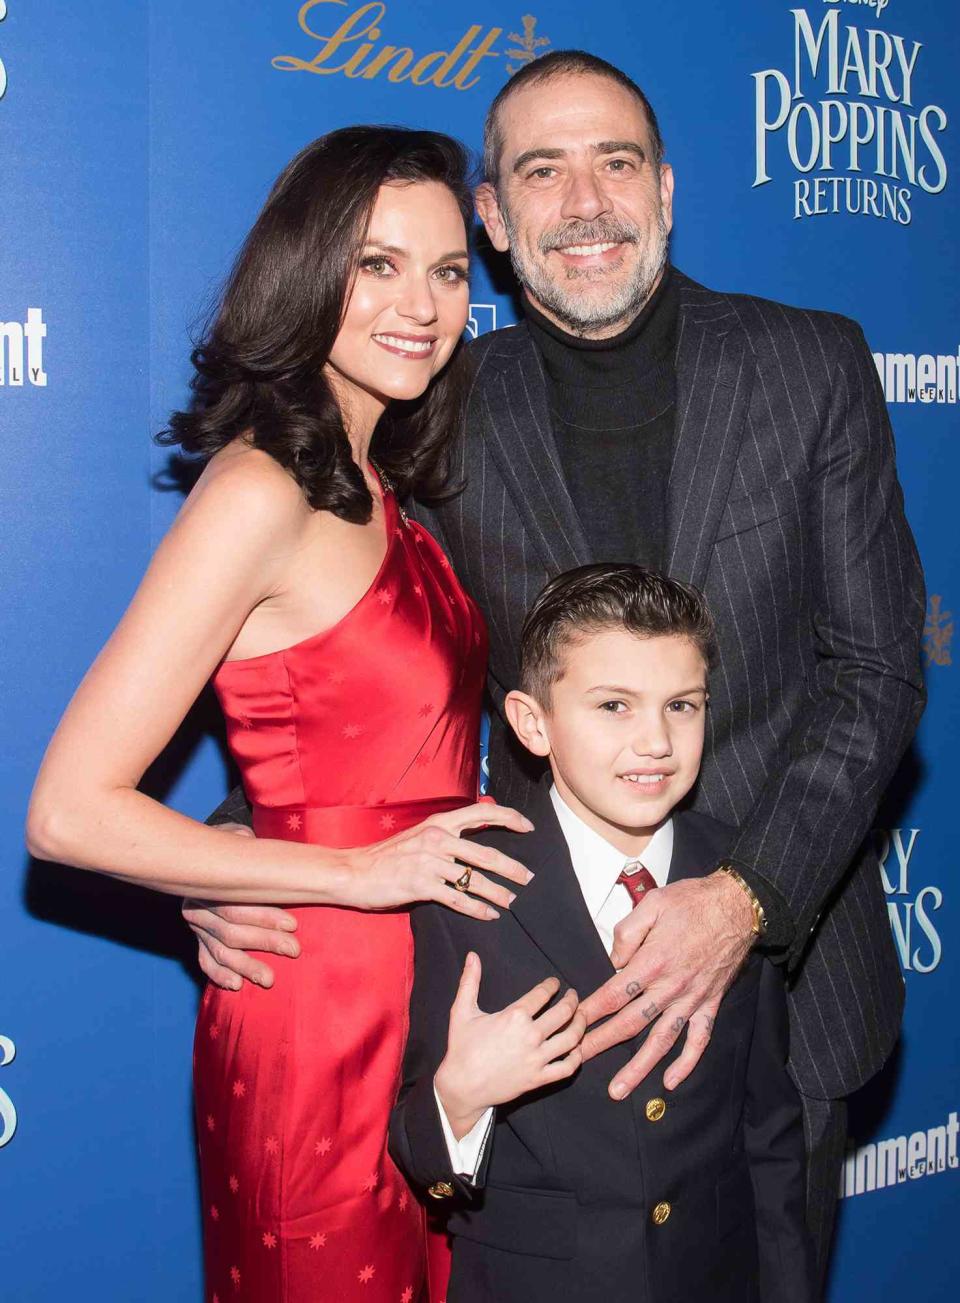 Hilarie Burton, Augustus Morgan, and Jeffrey Dean Morgan attend The Cinema Society's screening of "Mary Poppins Returns" co-hosted by Lindt Chocolate at SVA Theatre on December 17, 2018 in New York City